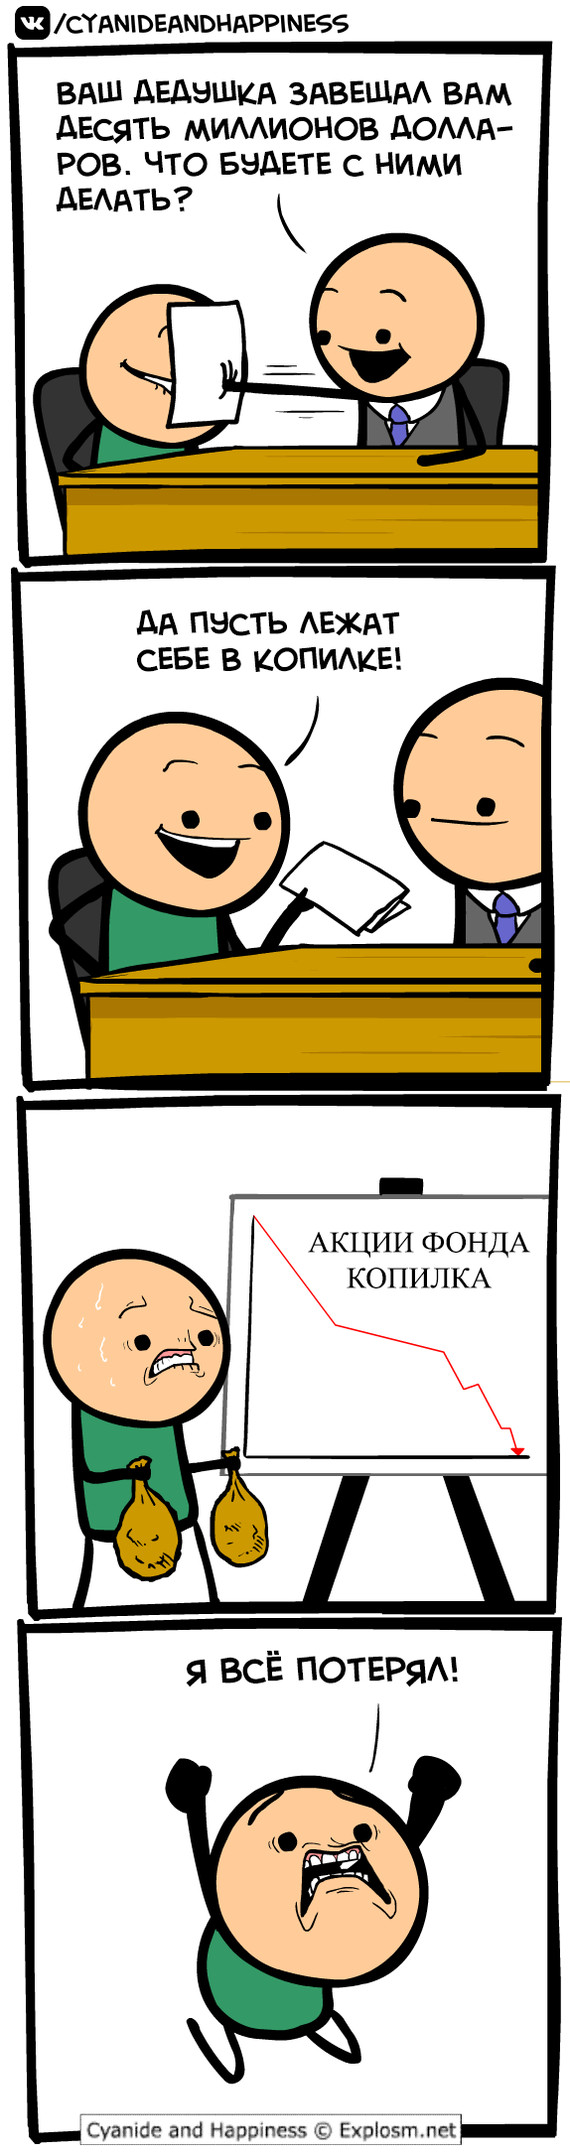   , Cyanide and Happiness, , 